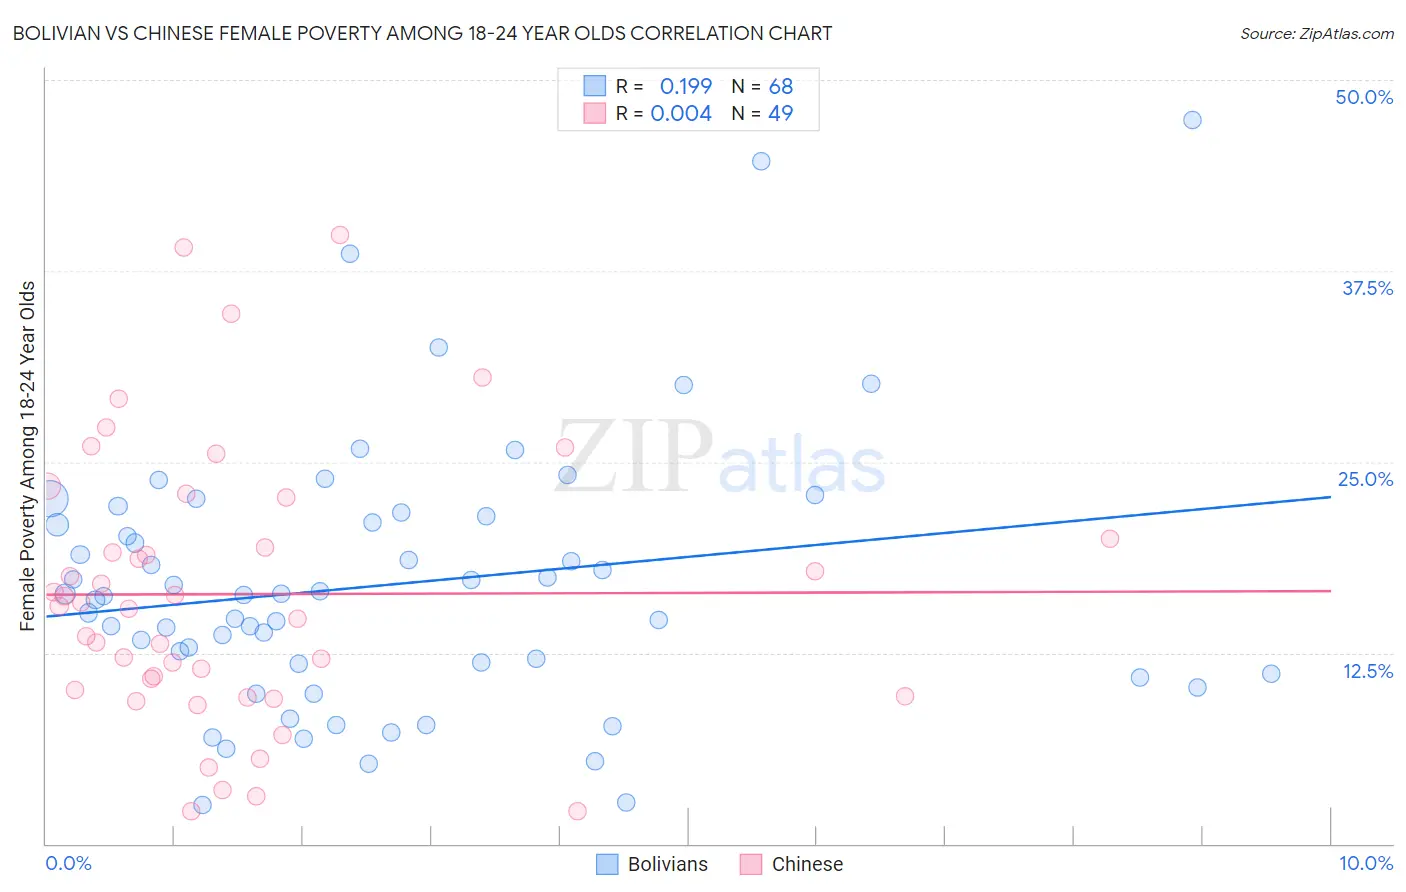 Bolivian vs Chinese Female Poverty Among 18-24 Year Olds